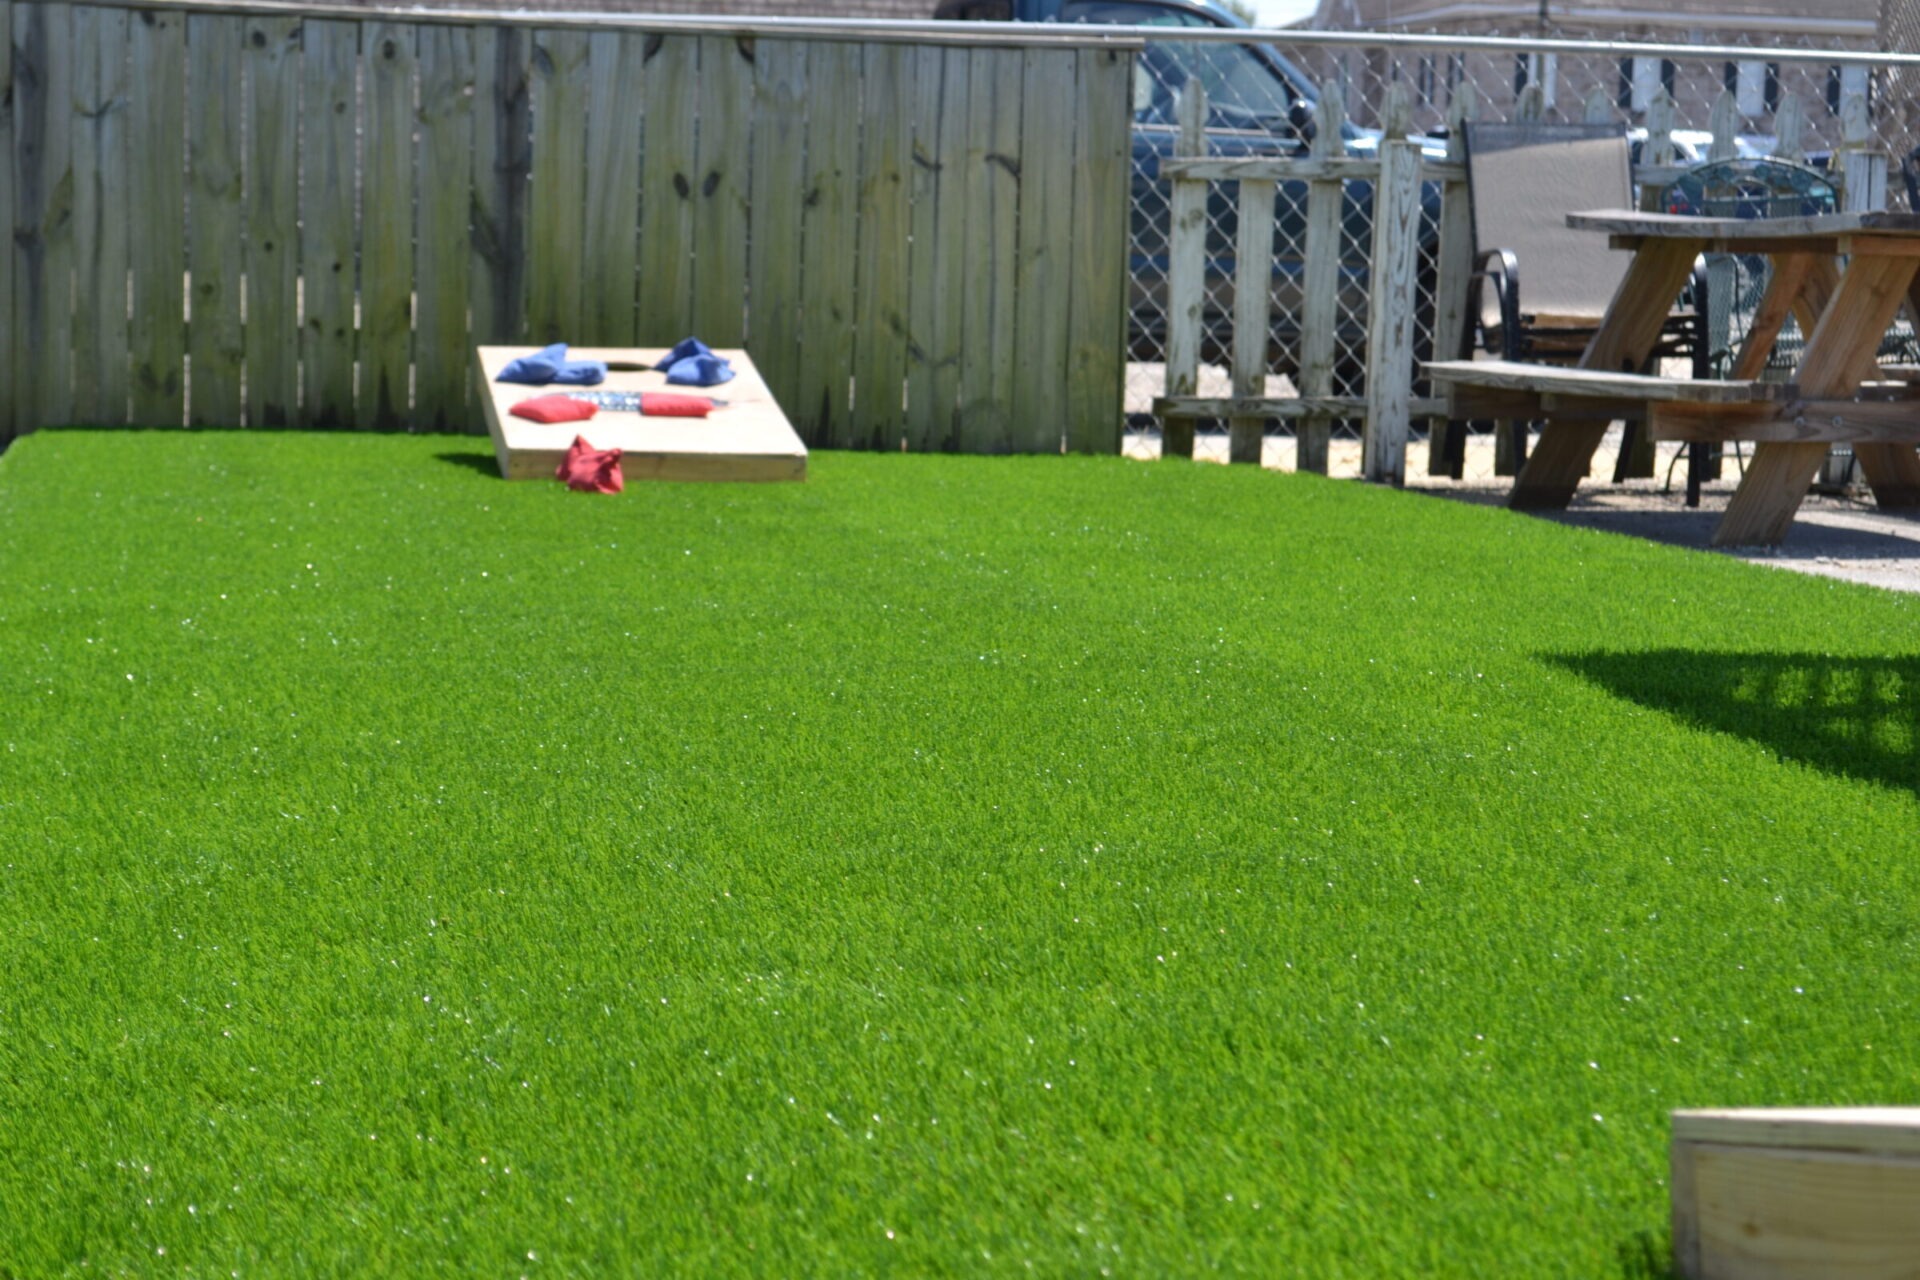 This image shows a vibrant green lawn with a cornhole game set up. Beanbags are on the boards and ground. A wooden picnic table is in the background.